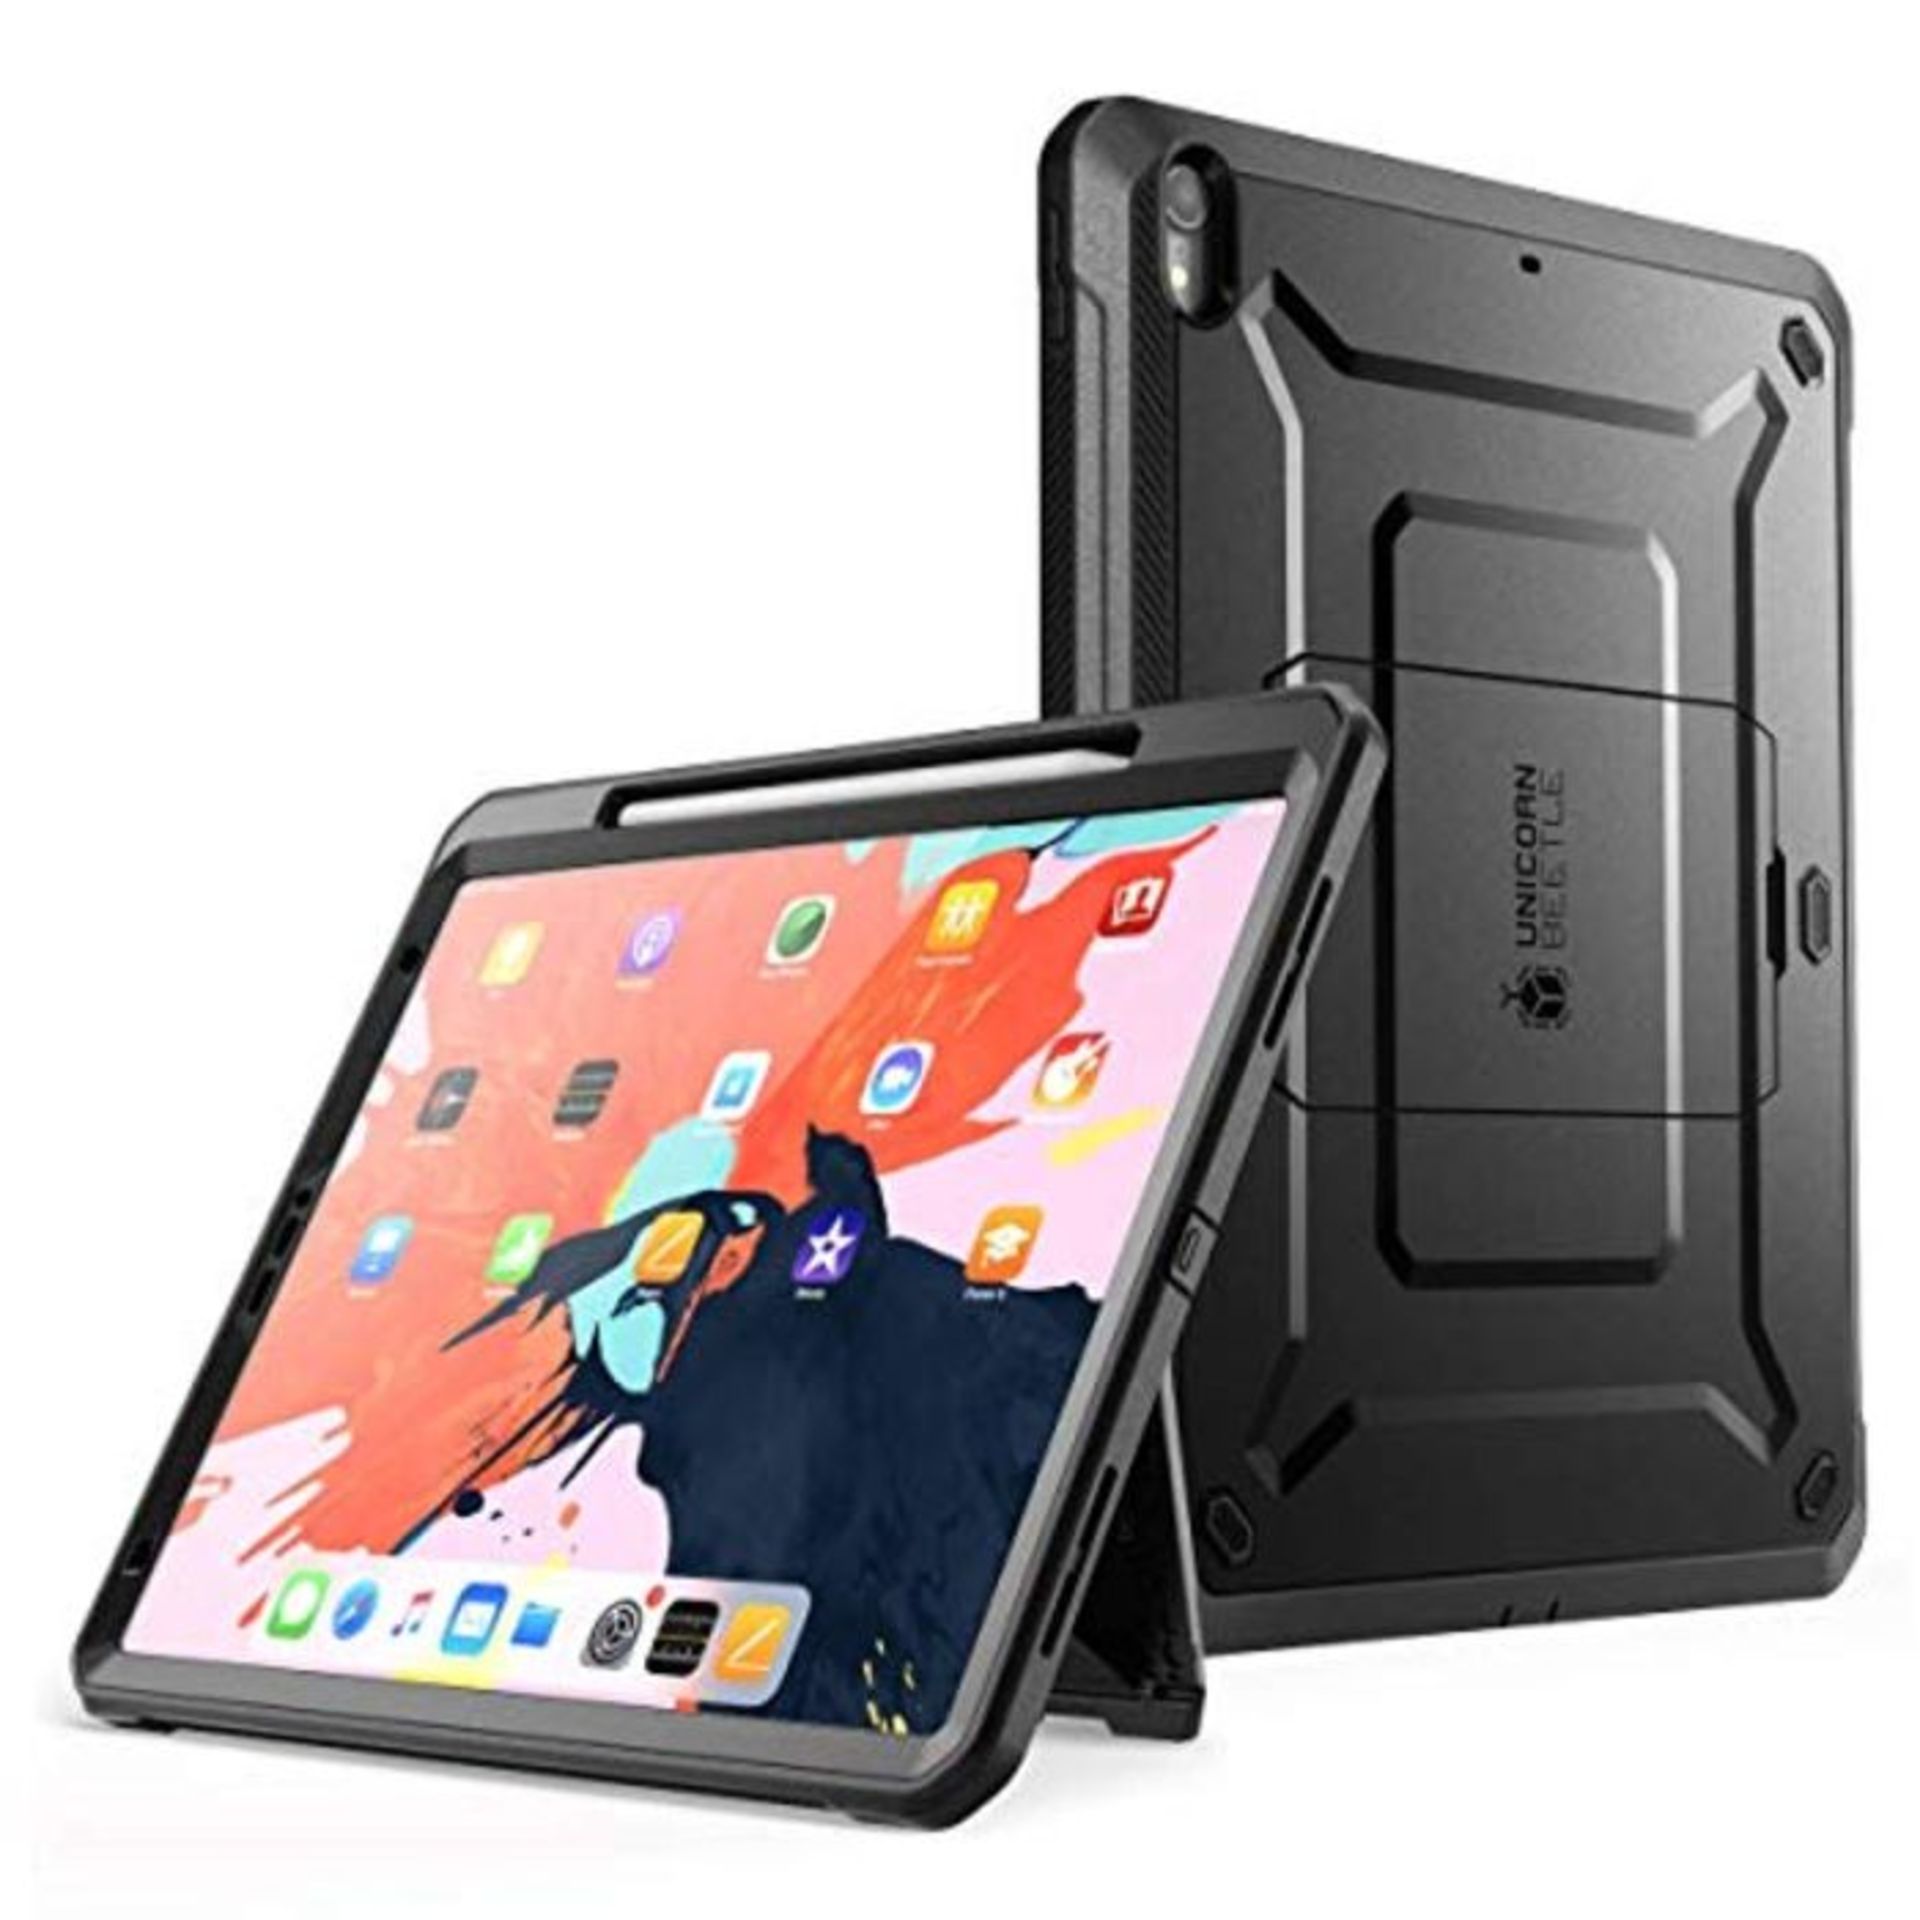 iPad Pro 12.9 Case 2018, SUPCASE Support Pencil Charging with Built-In Screen Protecto